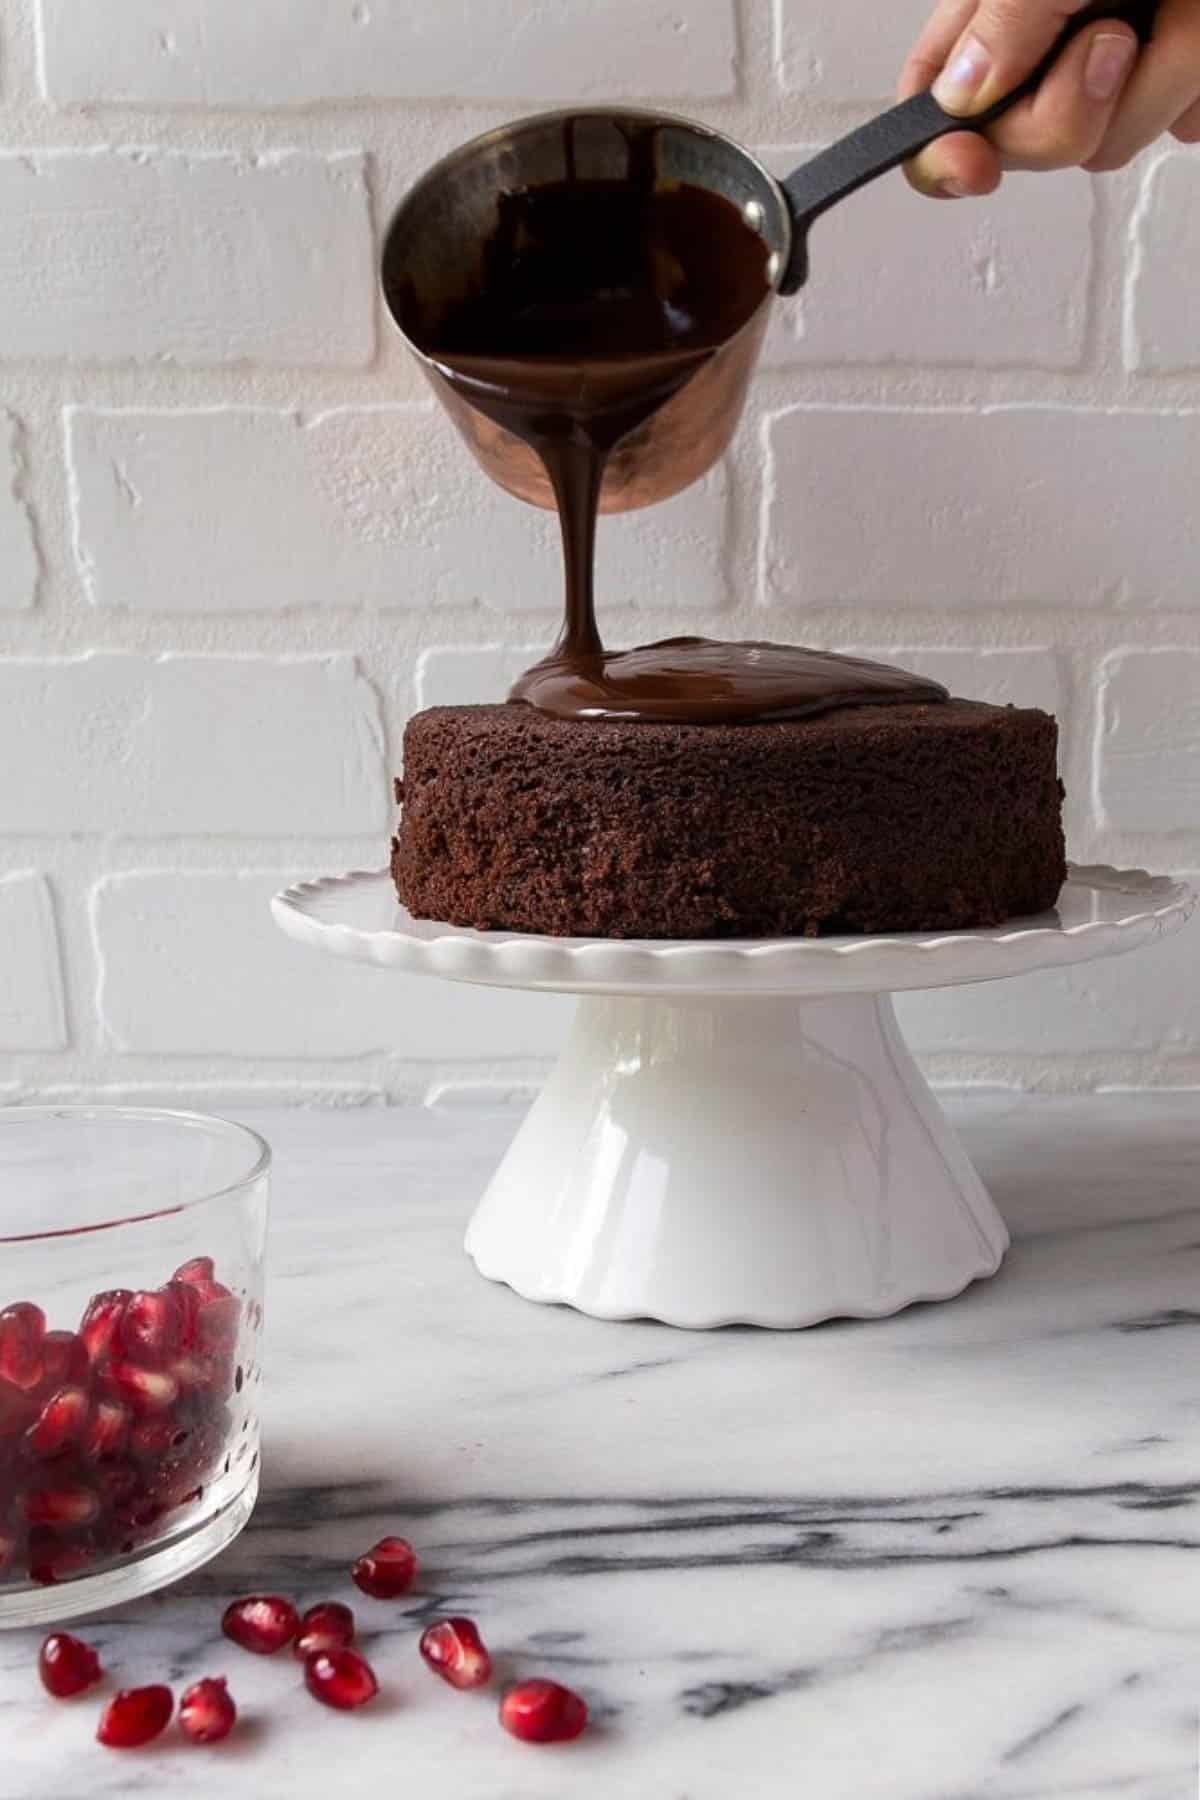 Hand pouring warm melted chocolate on top of a cake stand.